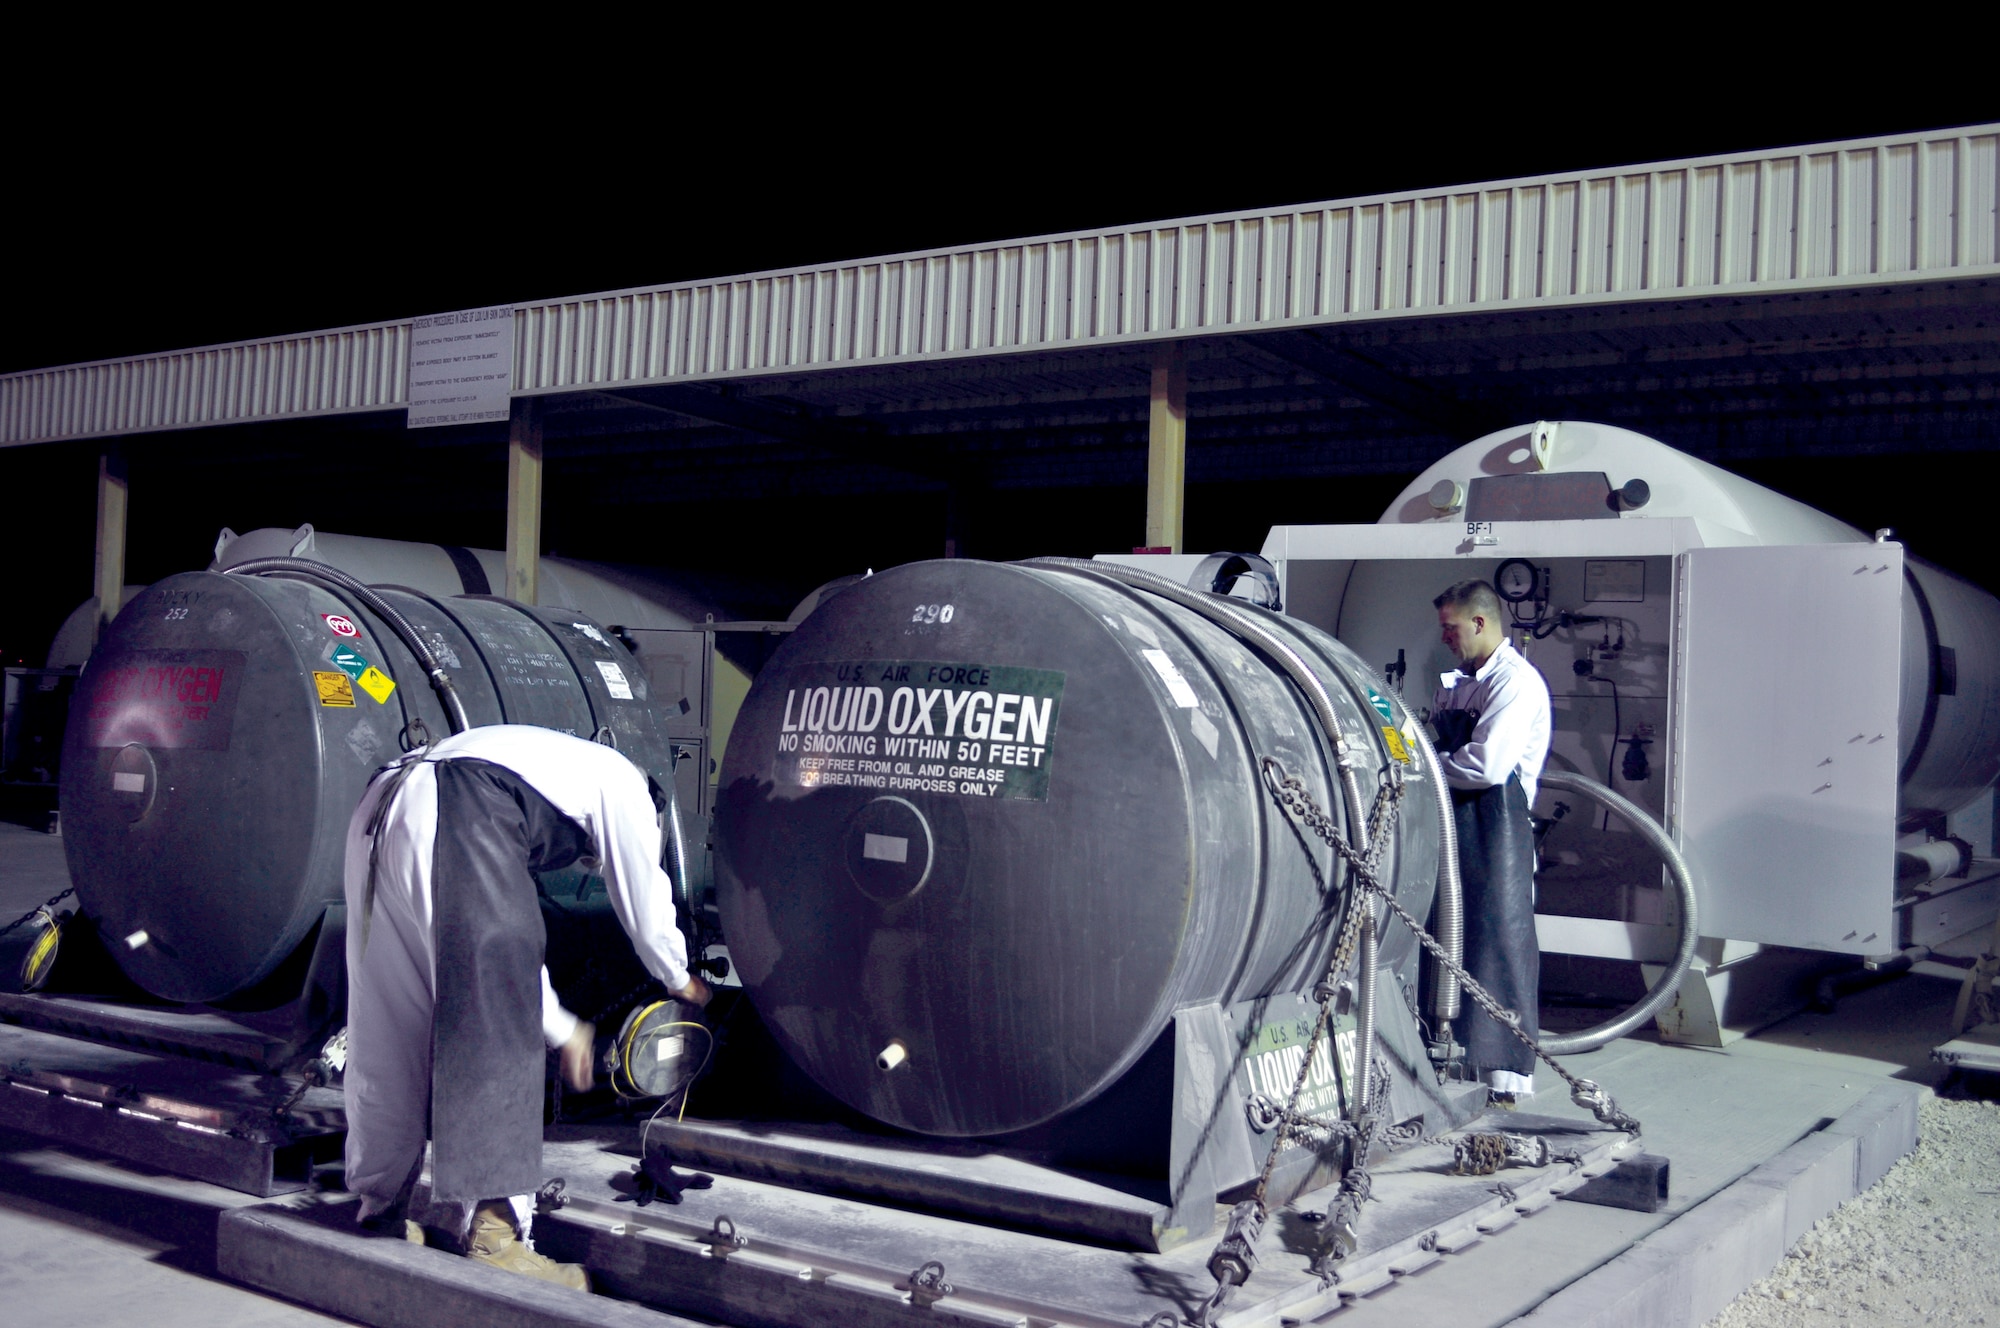 Sergeants Crom and Dietz perform a maintenance check on a tank used to hold liquid oxygen. The oxygen in liquid form is extremely cold and boils at subzero temperatures. For this reason, the oxygen has to remain in a tank deemed safe for its containment. As cryogenics technicians, the Airmen have a thorough knowledge of how to maintain the tanks according to Air Force instruction.